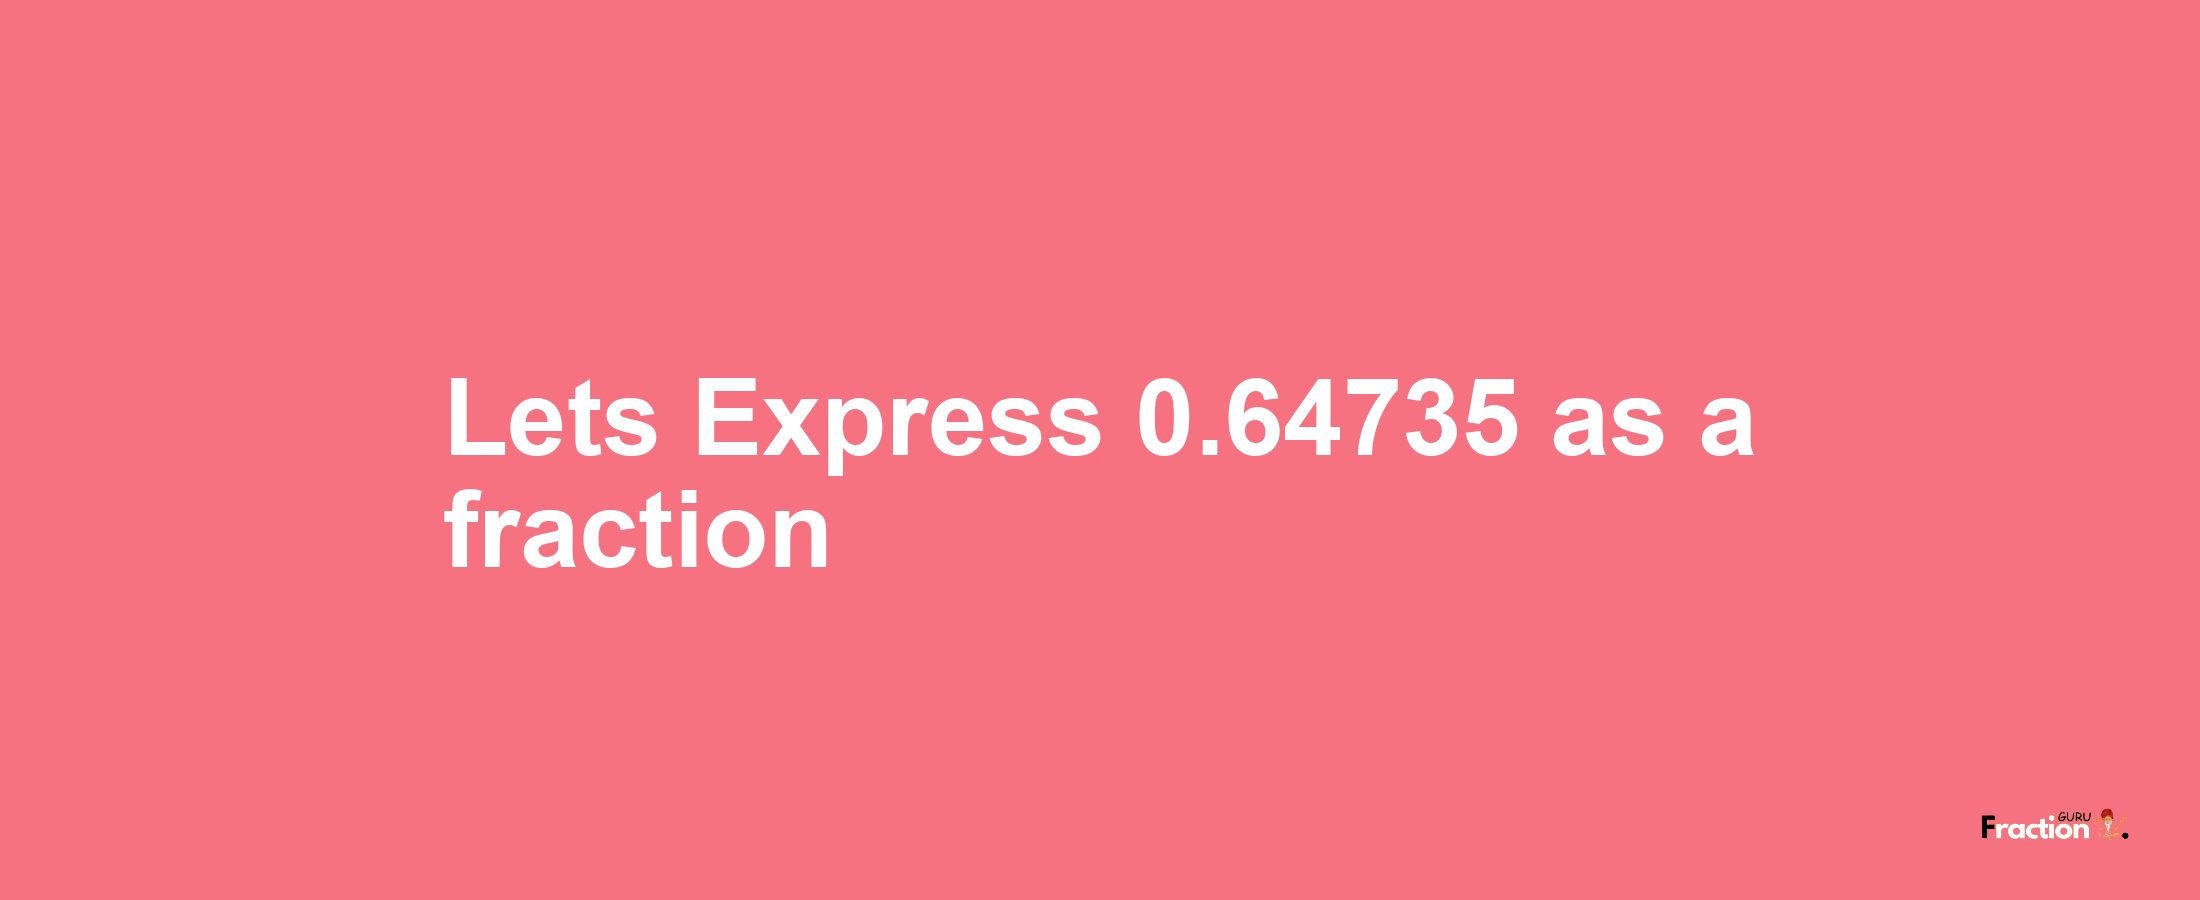 Lets Express 0.64735 as afraction